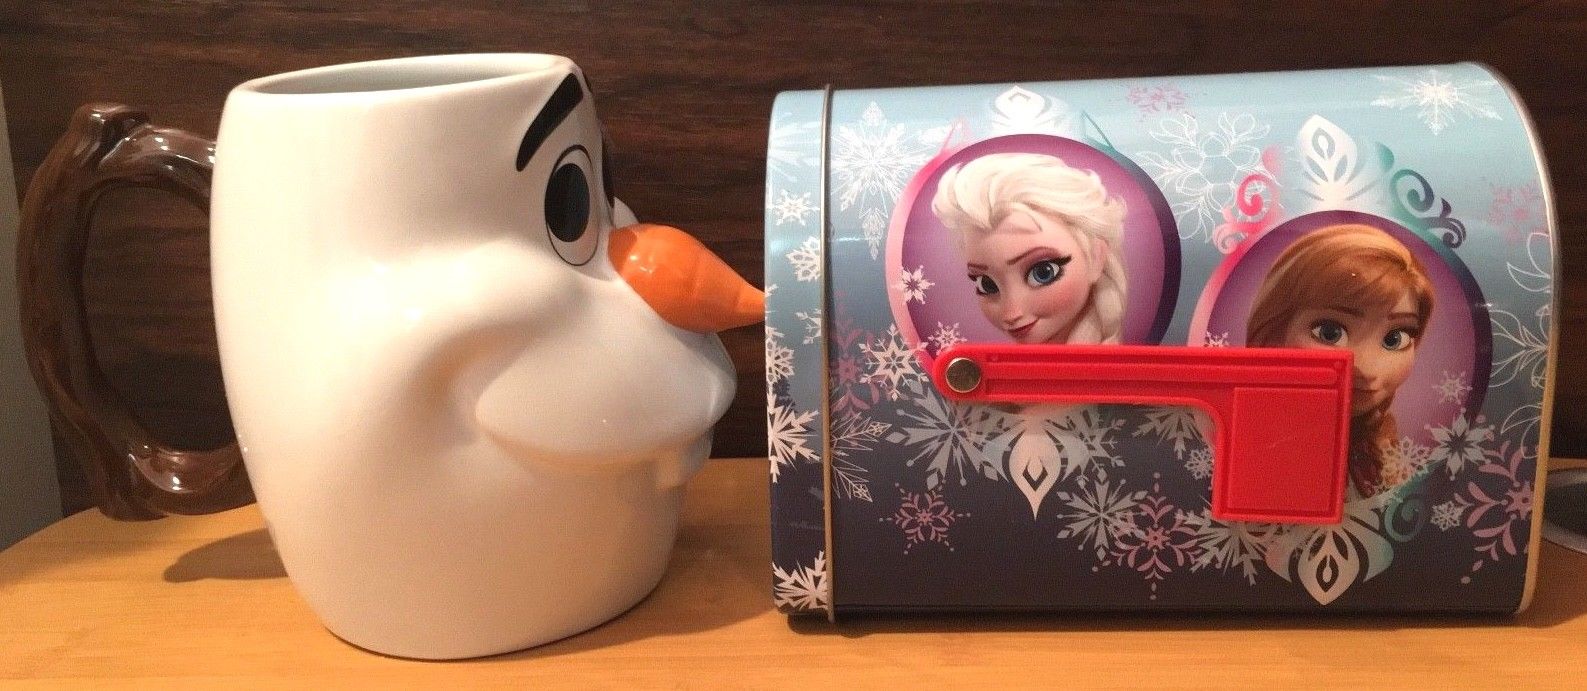 Disney Frozen Olaf Cup Mug - 20 oz. & Tin Mailbox with Elsa and Anna Pictures